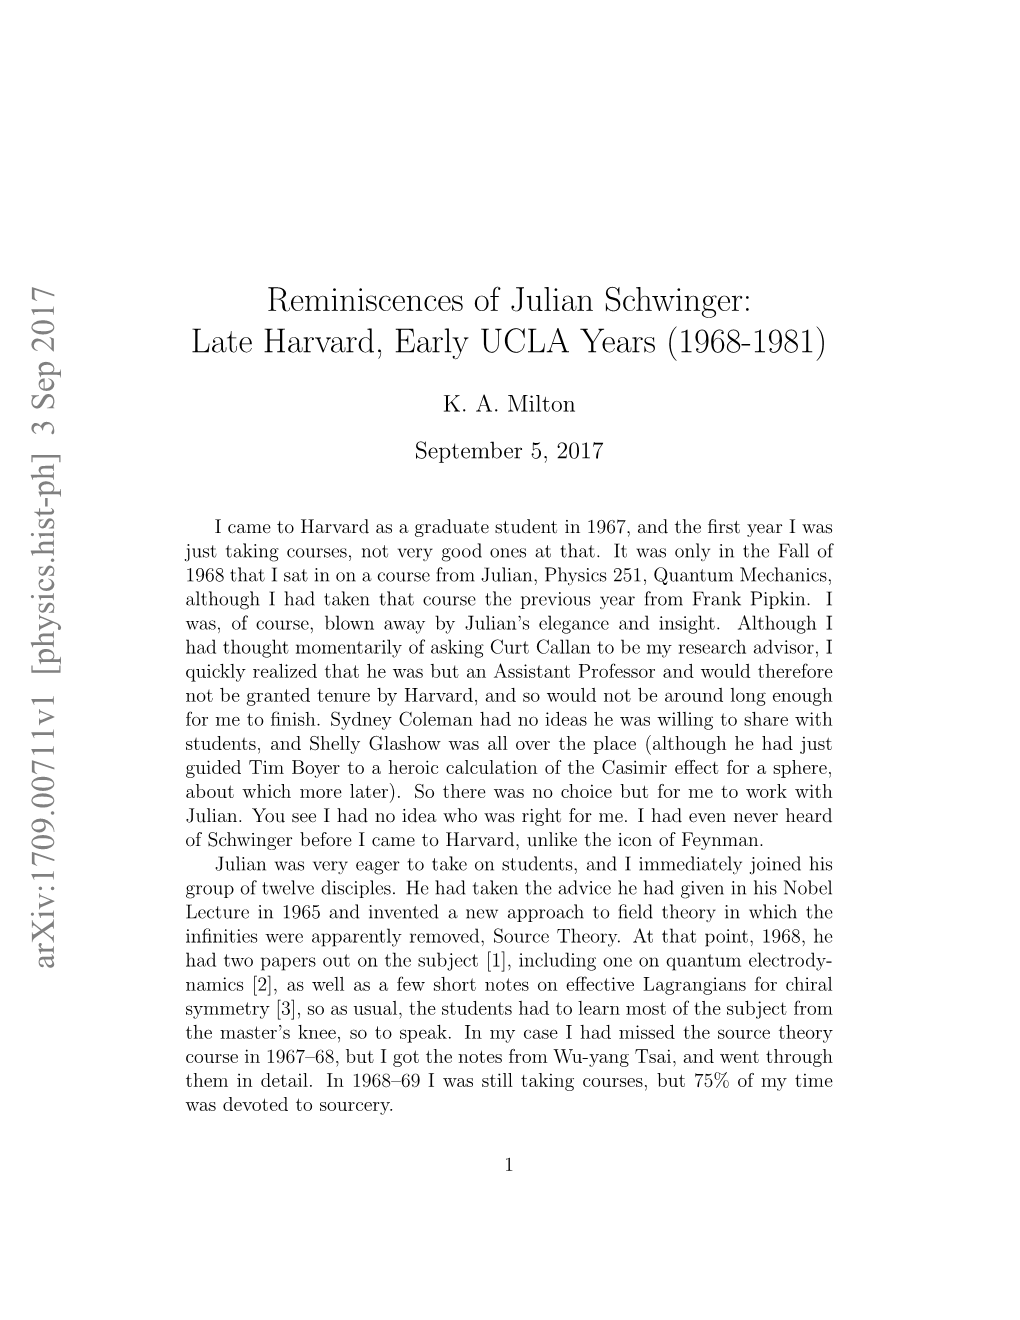 Reminiscences of Julian Schwinger: Late Harvard, Early UCLA Years